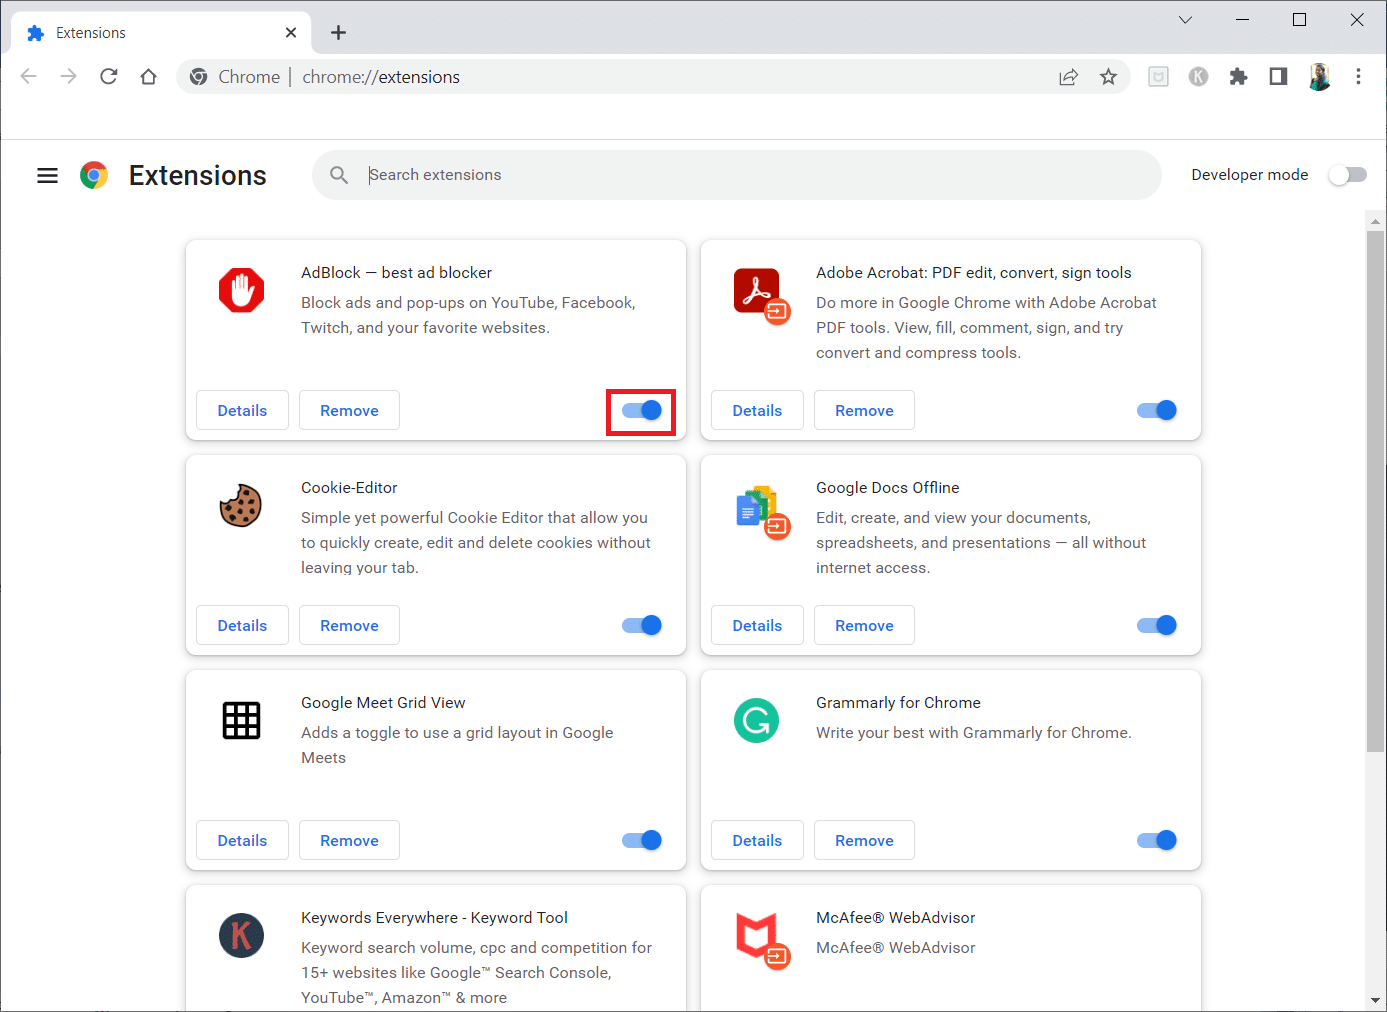 under the Extensions Menu, turn off the toggle for the Adblock extension